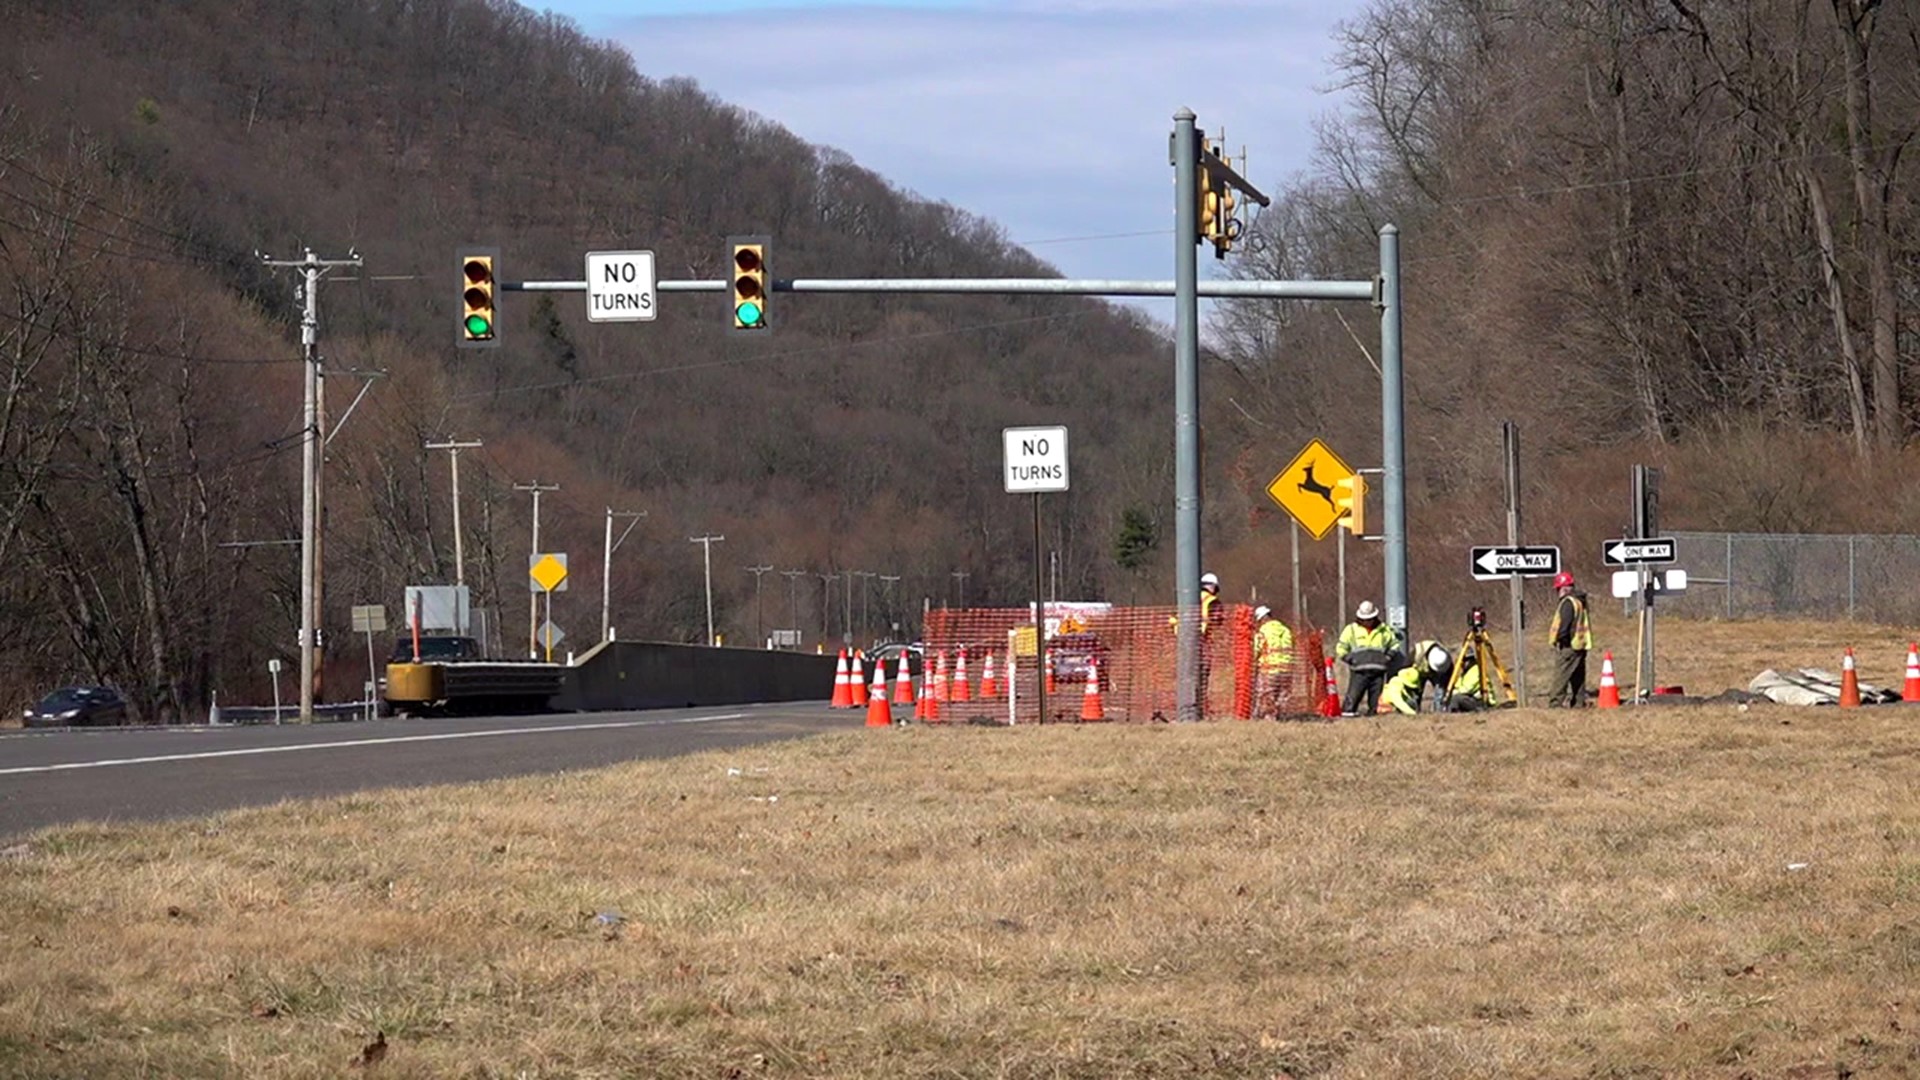 PennDOT crews began work Monday on a months-long resurfacing project in Schuylkill County.